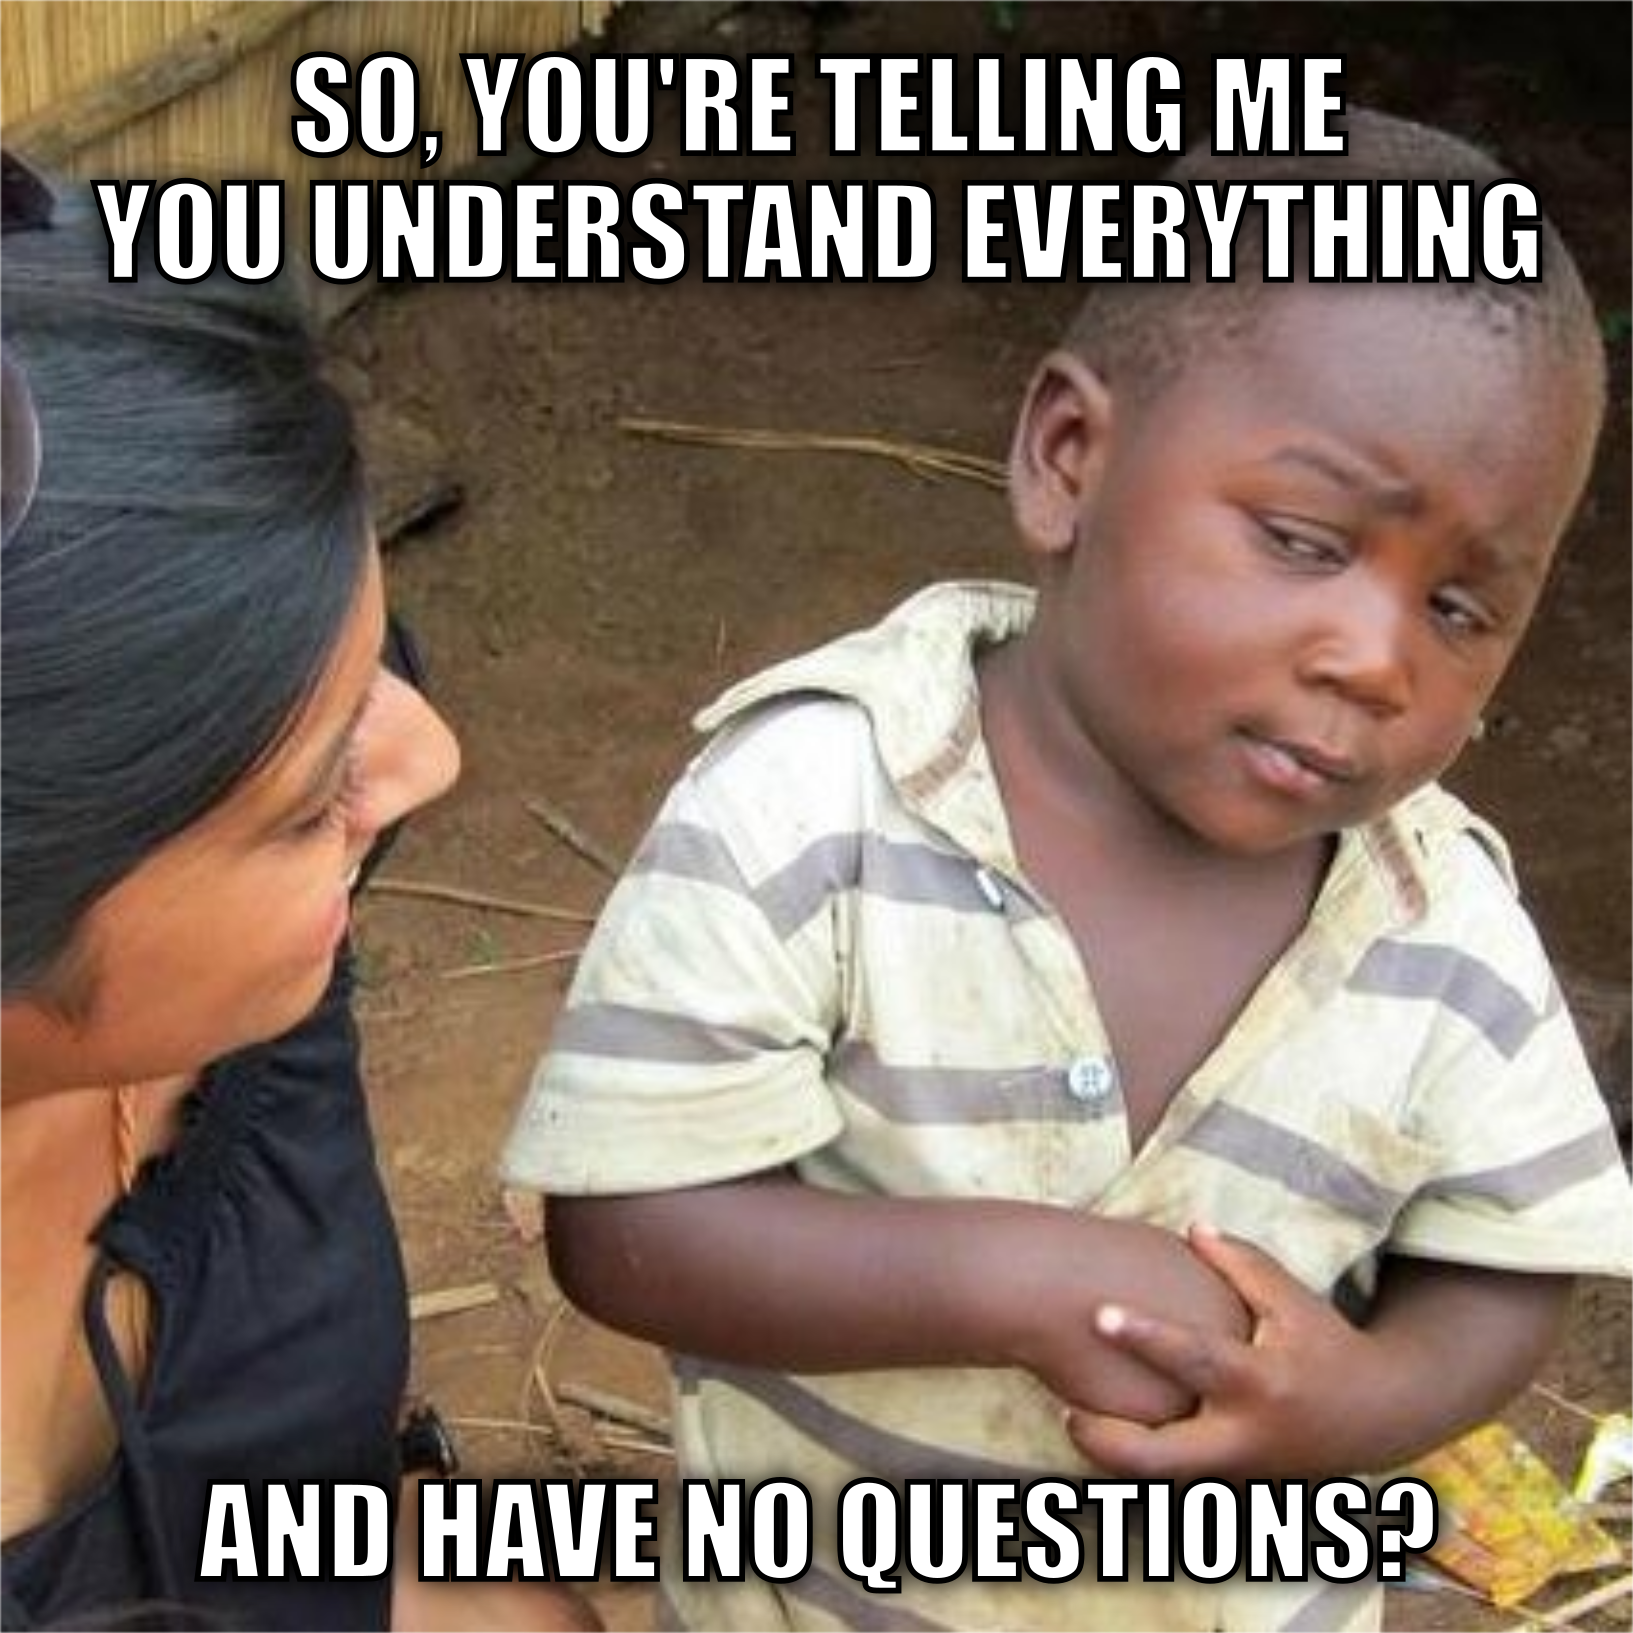 So, you're telling me you understand everything and have no questions?